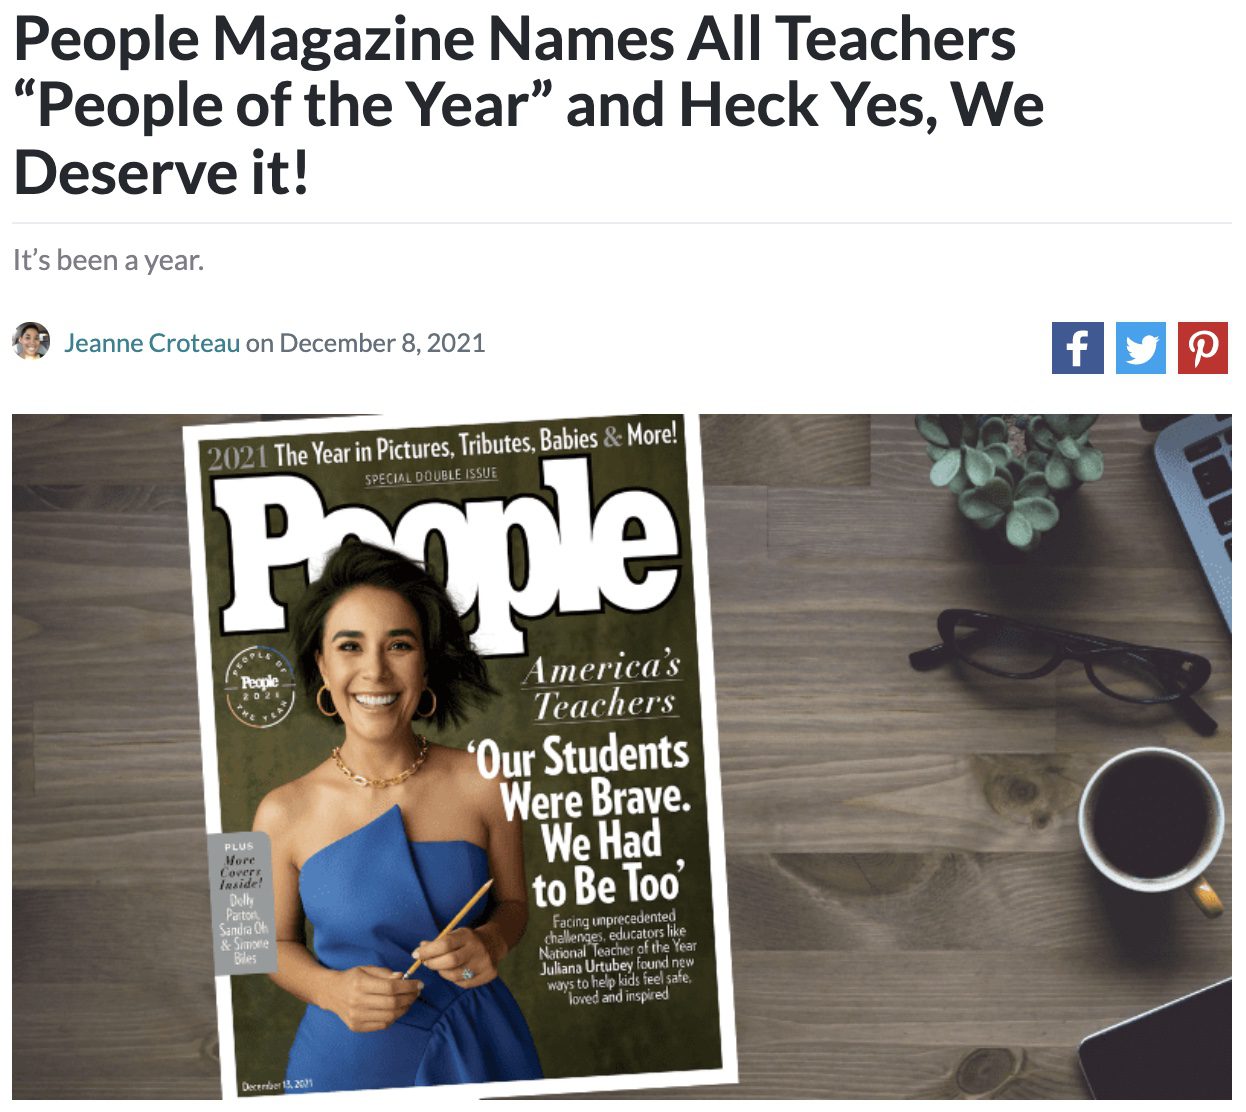 Screencap of an article about People magazine naming teachers People of the Year